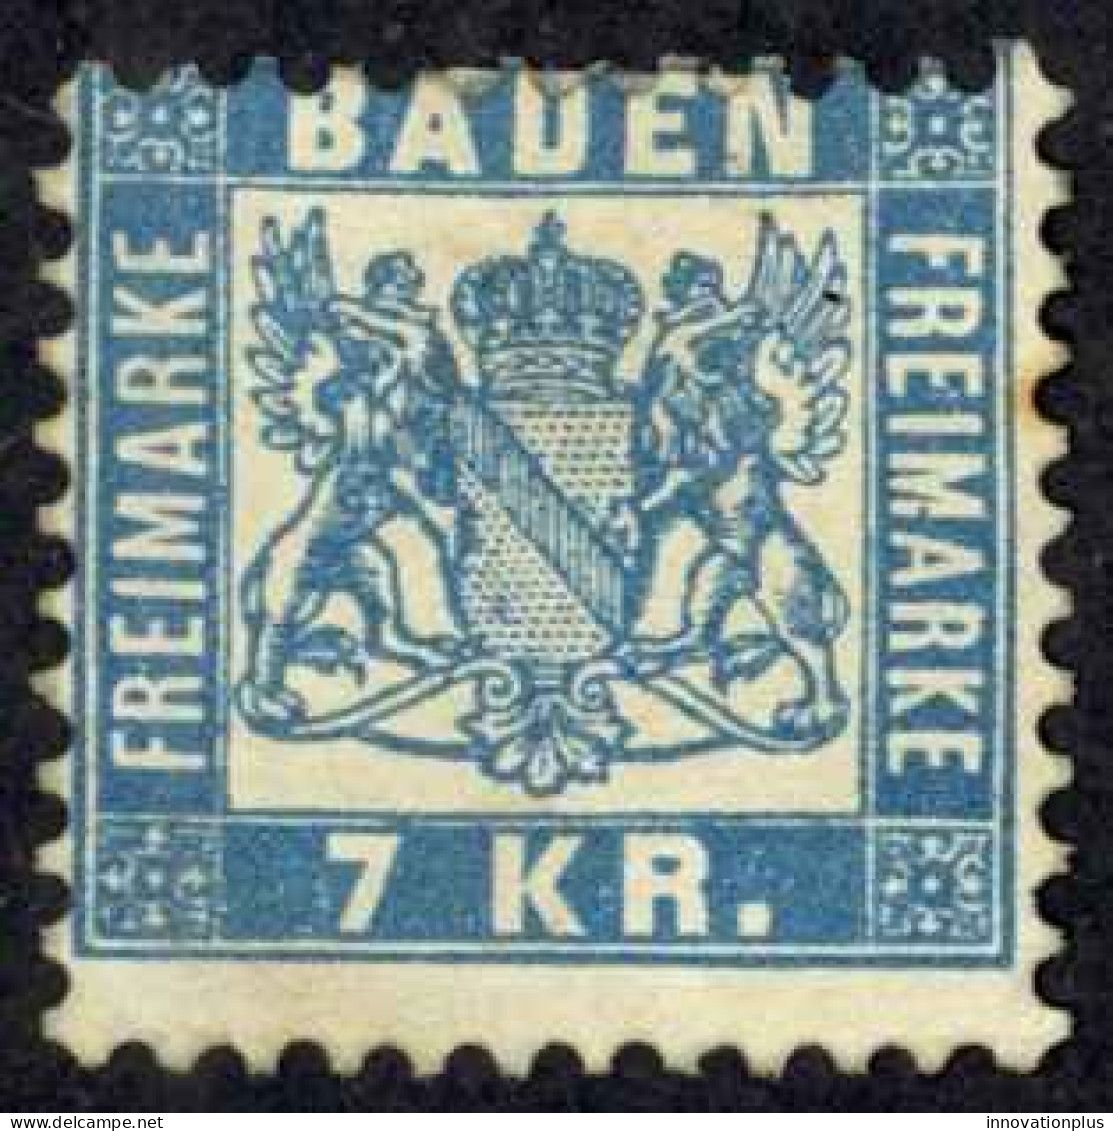 Germany Baden Sc# 28 MH 1868 7kr Dull Blue Coat Of Arms - Mint